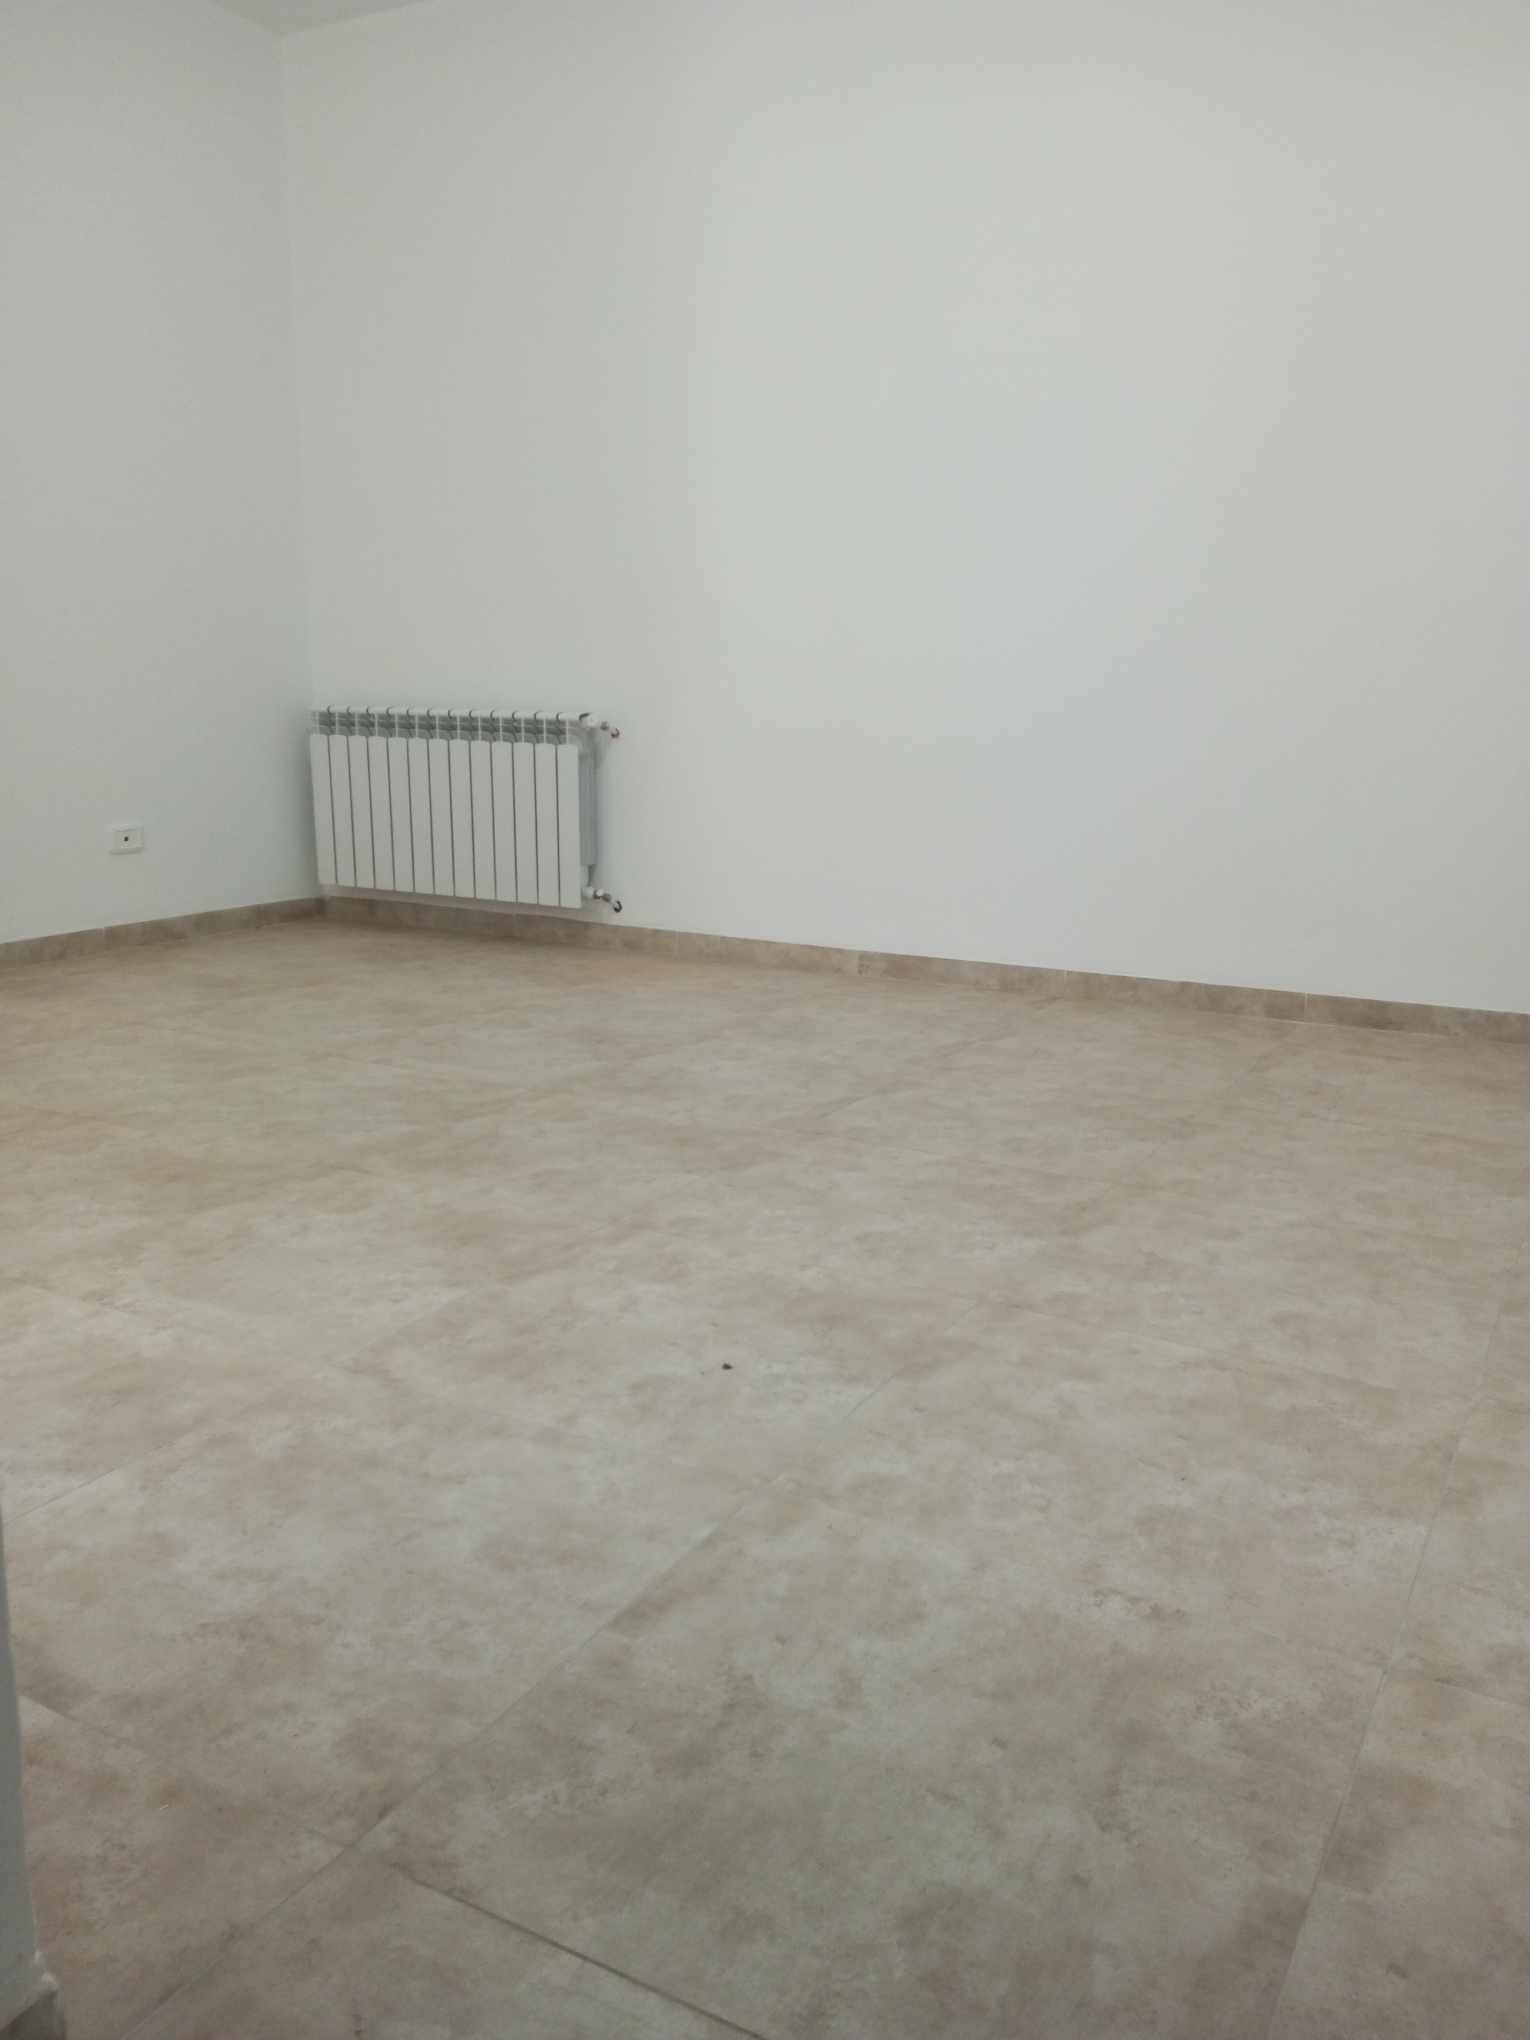 Fouchana Cite El Hidhab Location Appart. 1 pice Appartement s1